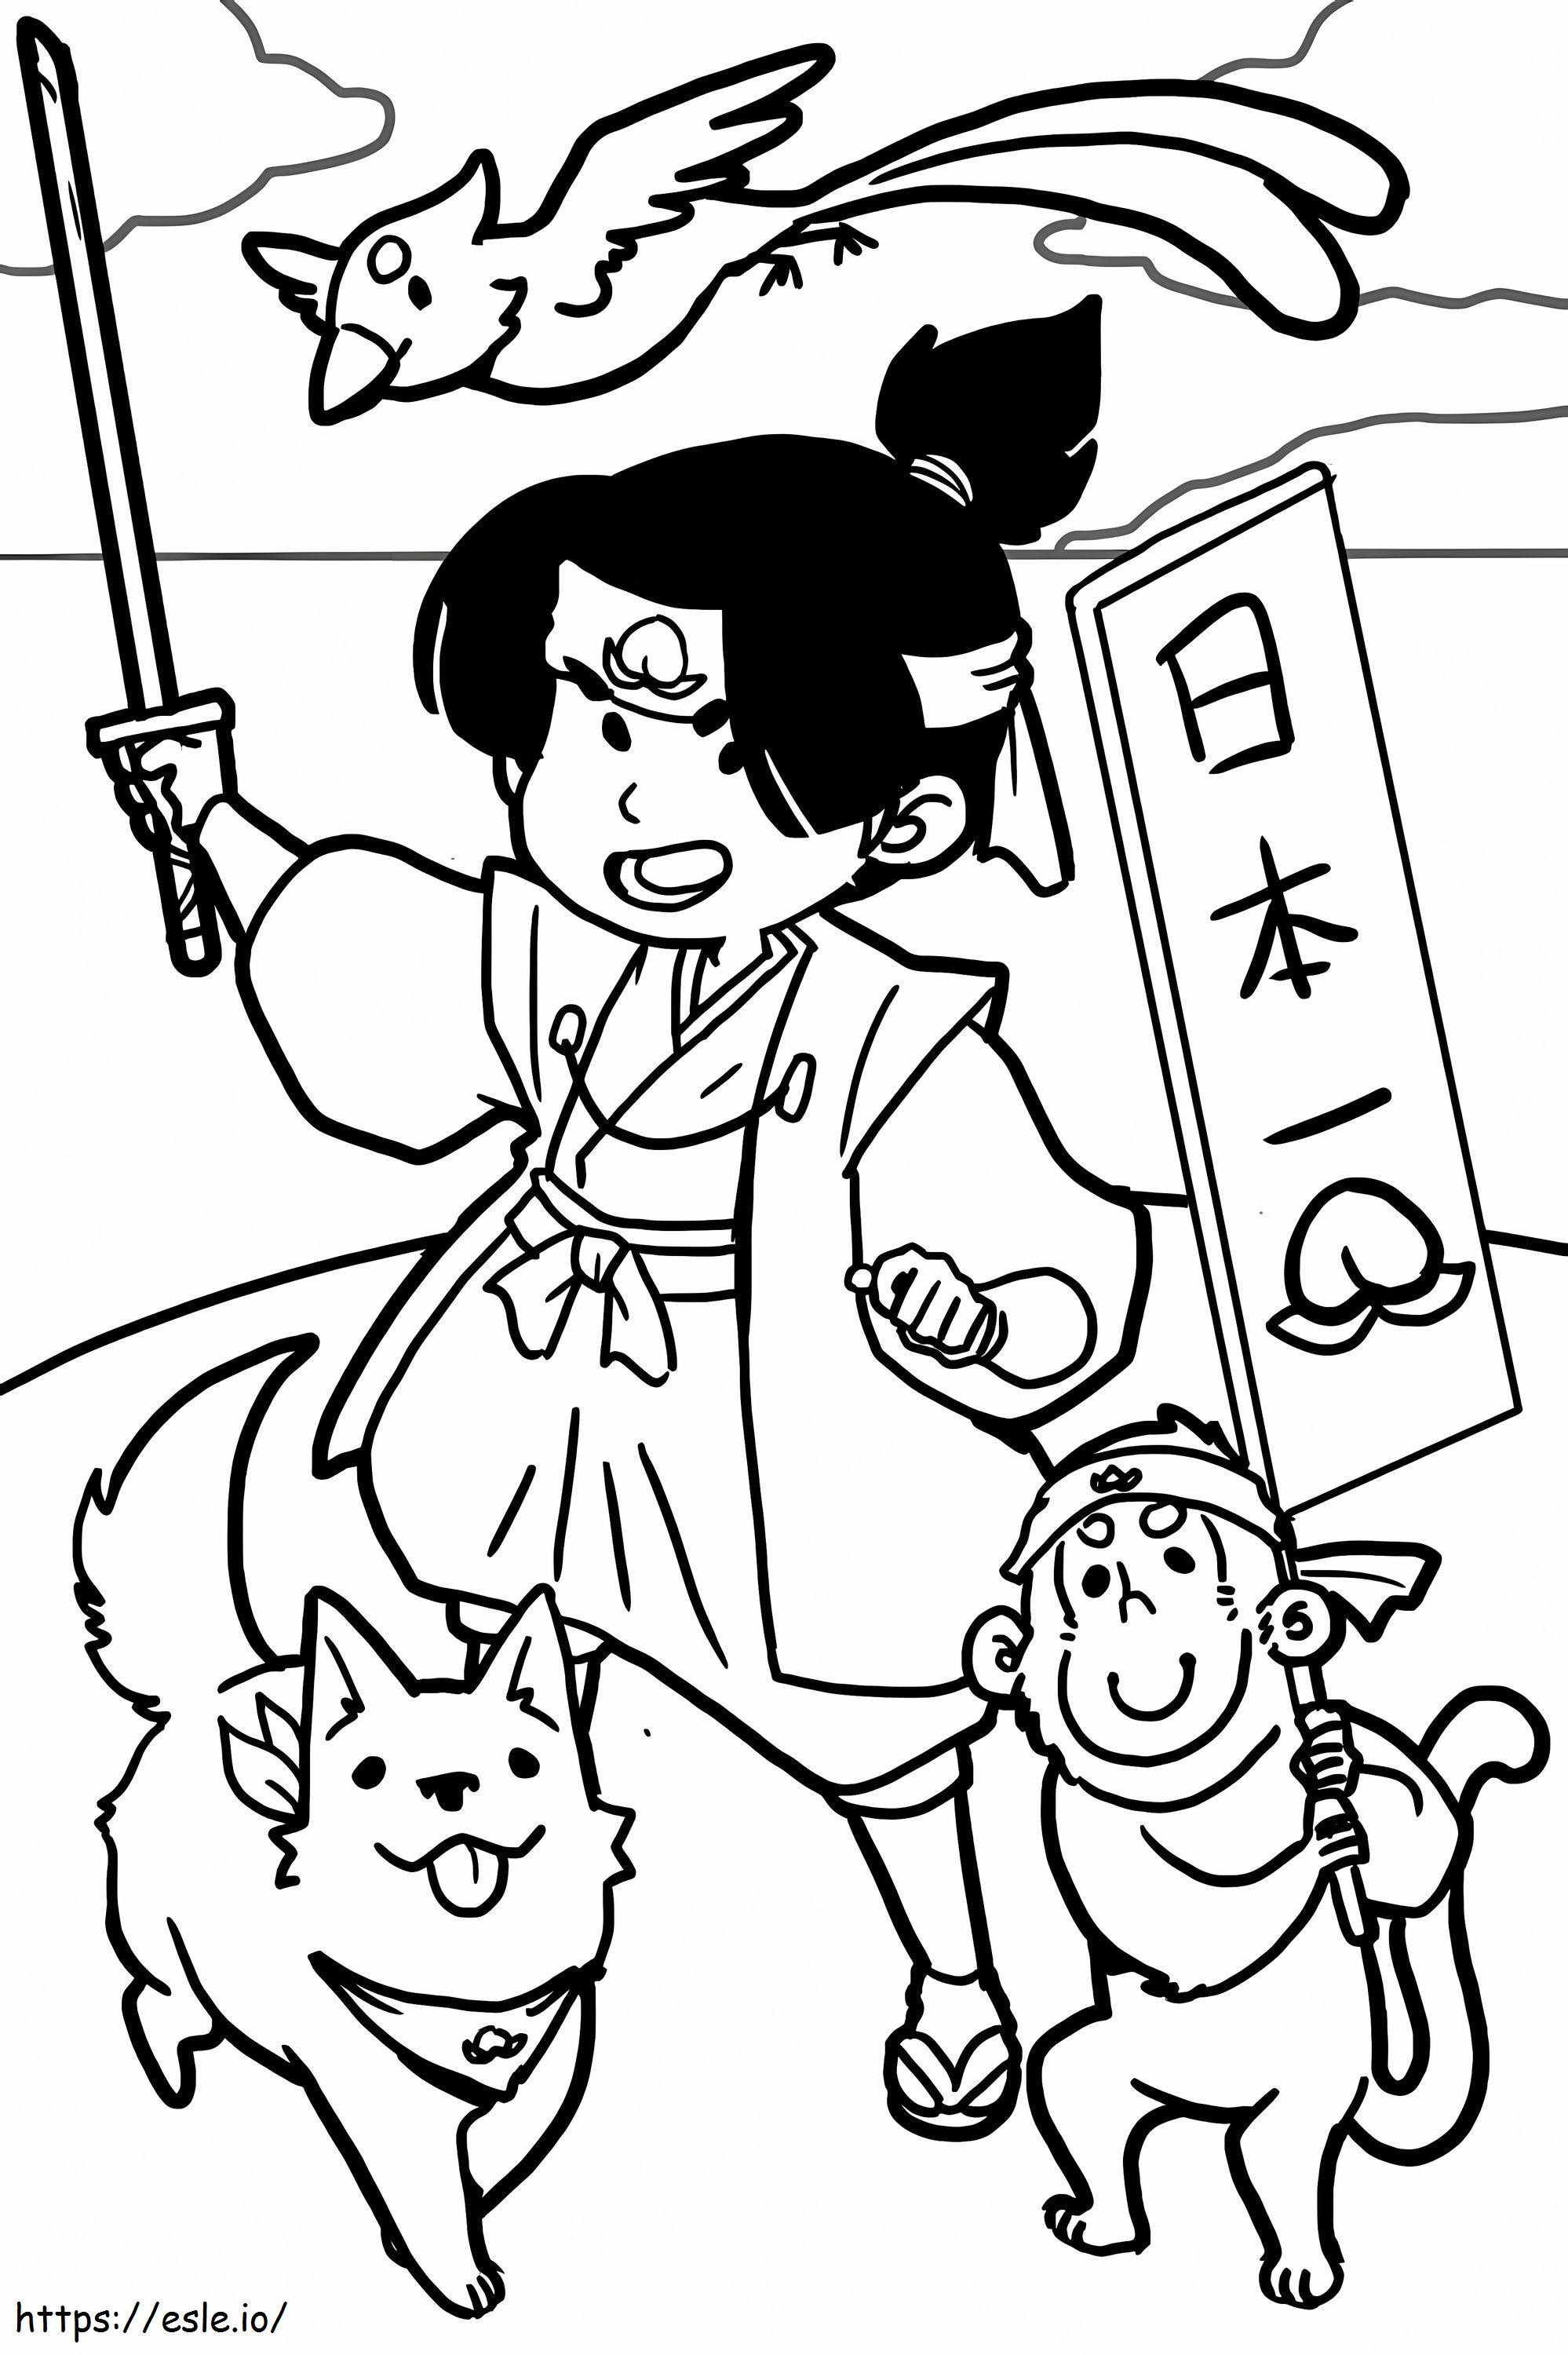 The Tale Of Momotaro coloring page